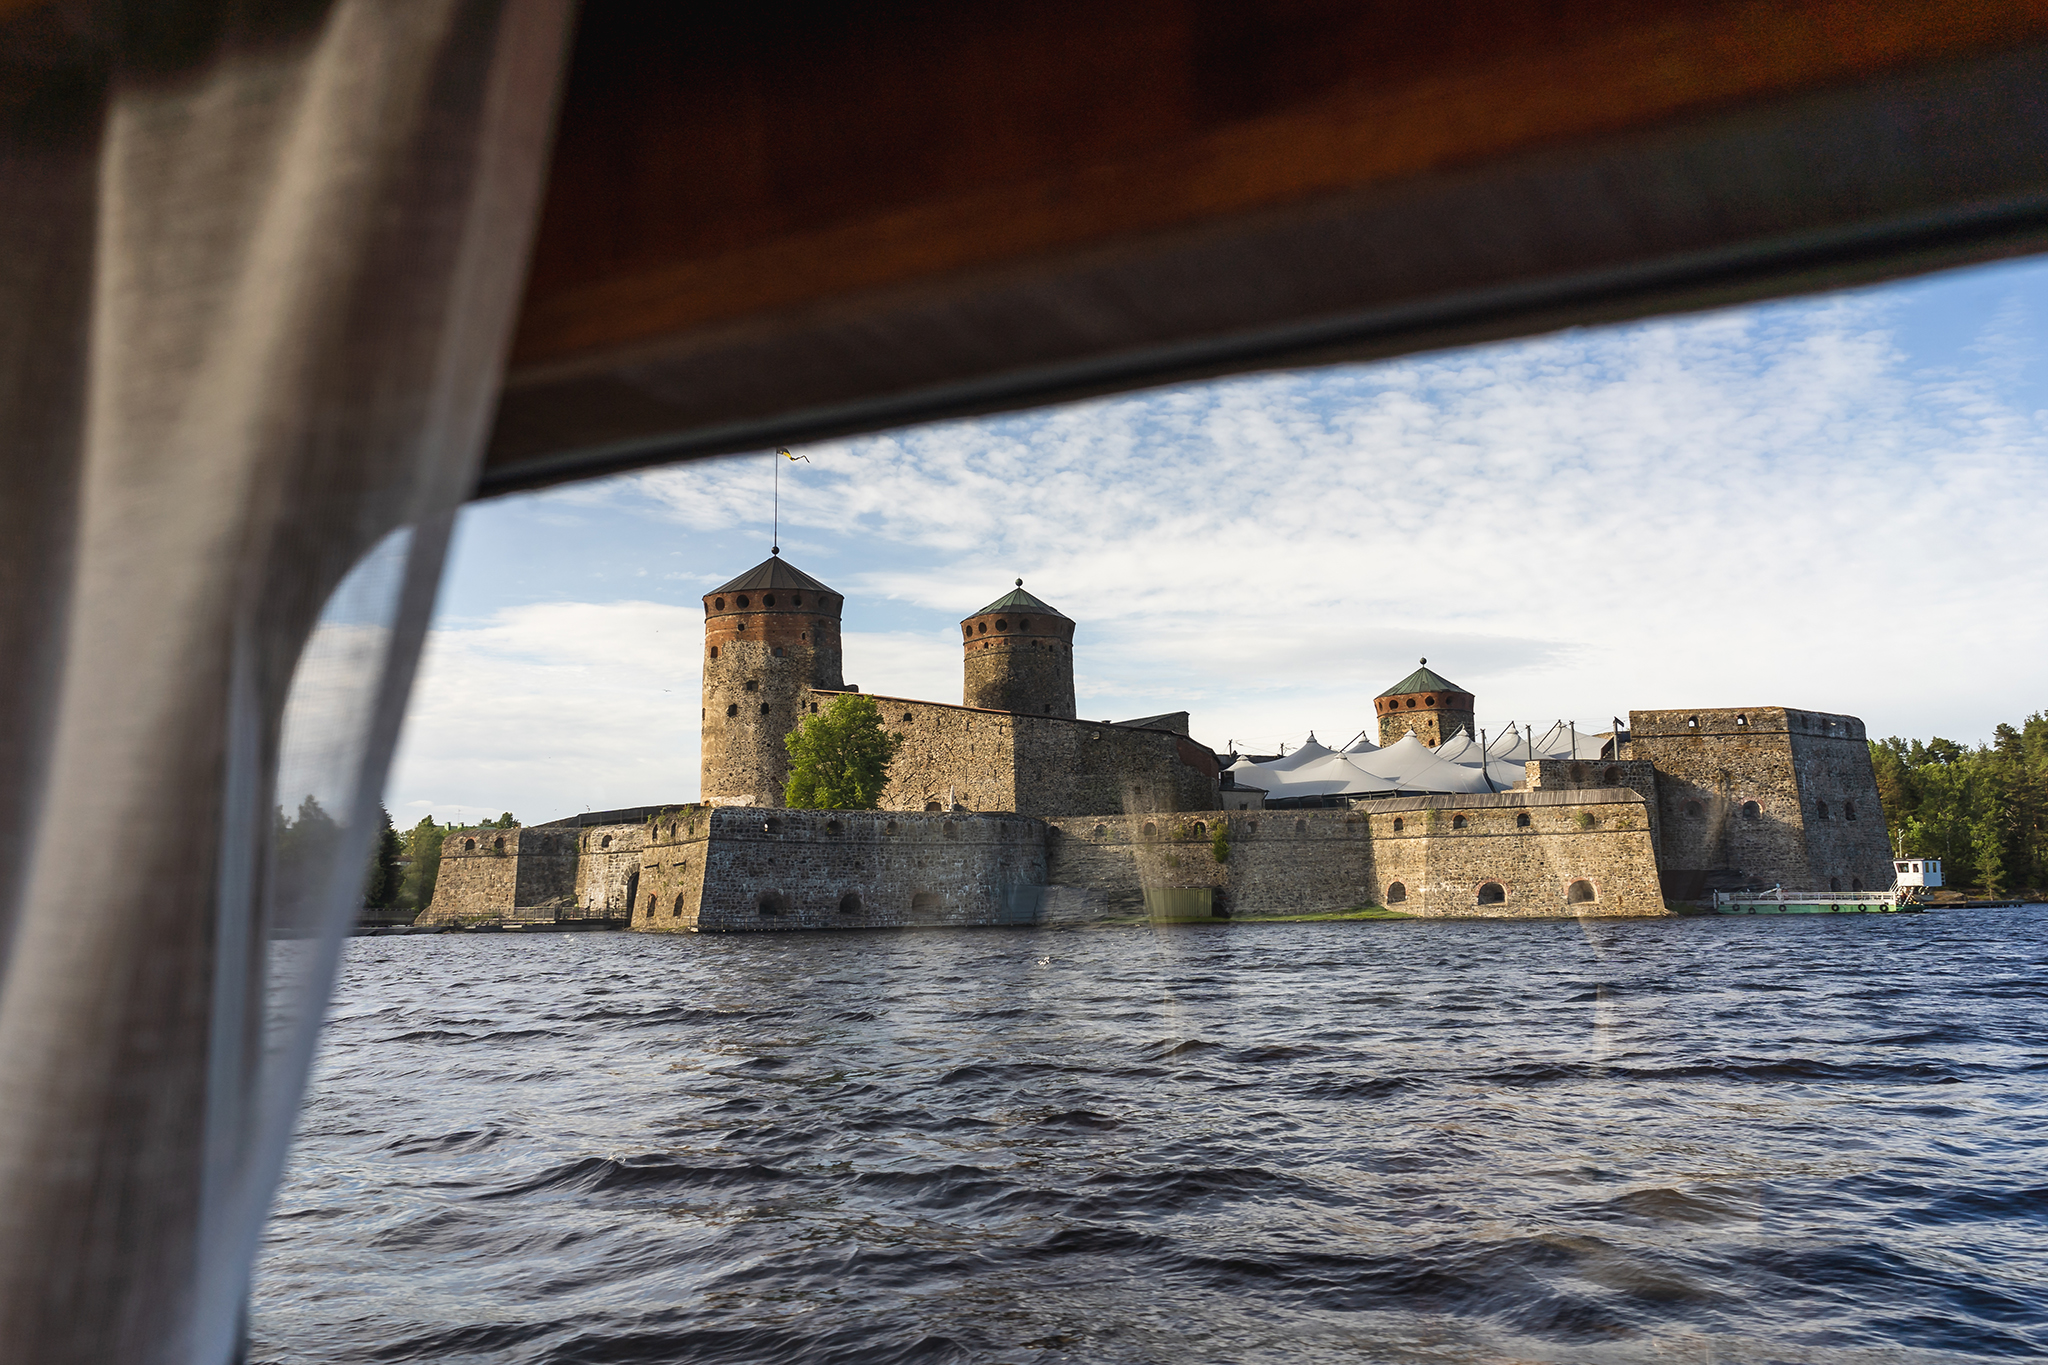 Olavinlinna castle from the waters